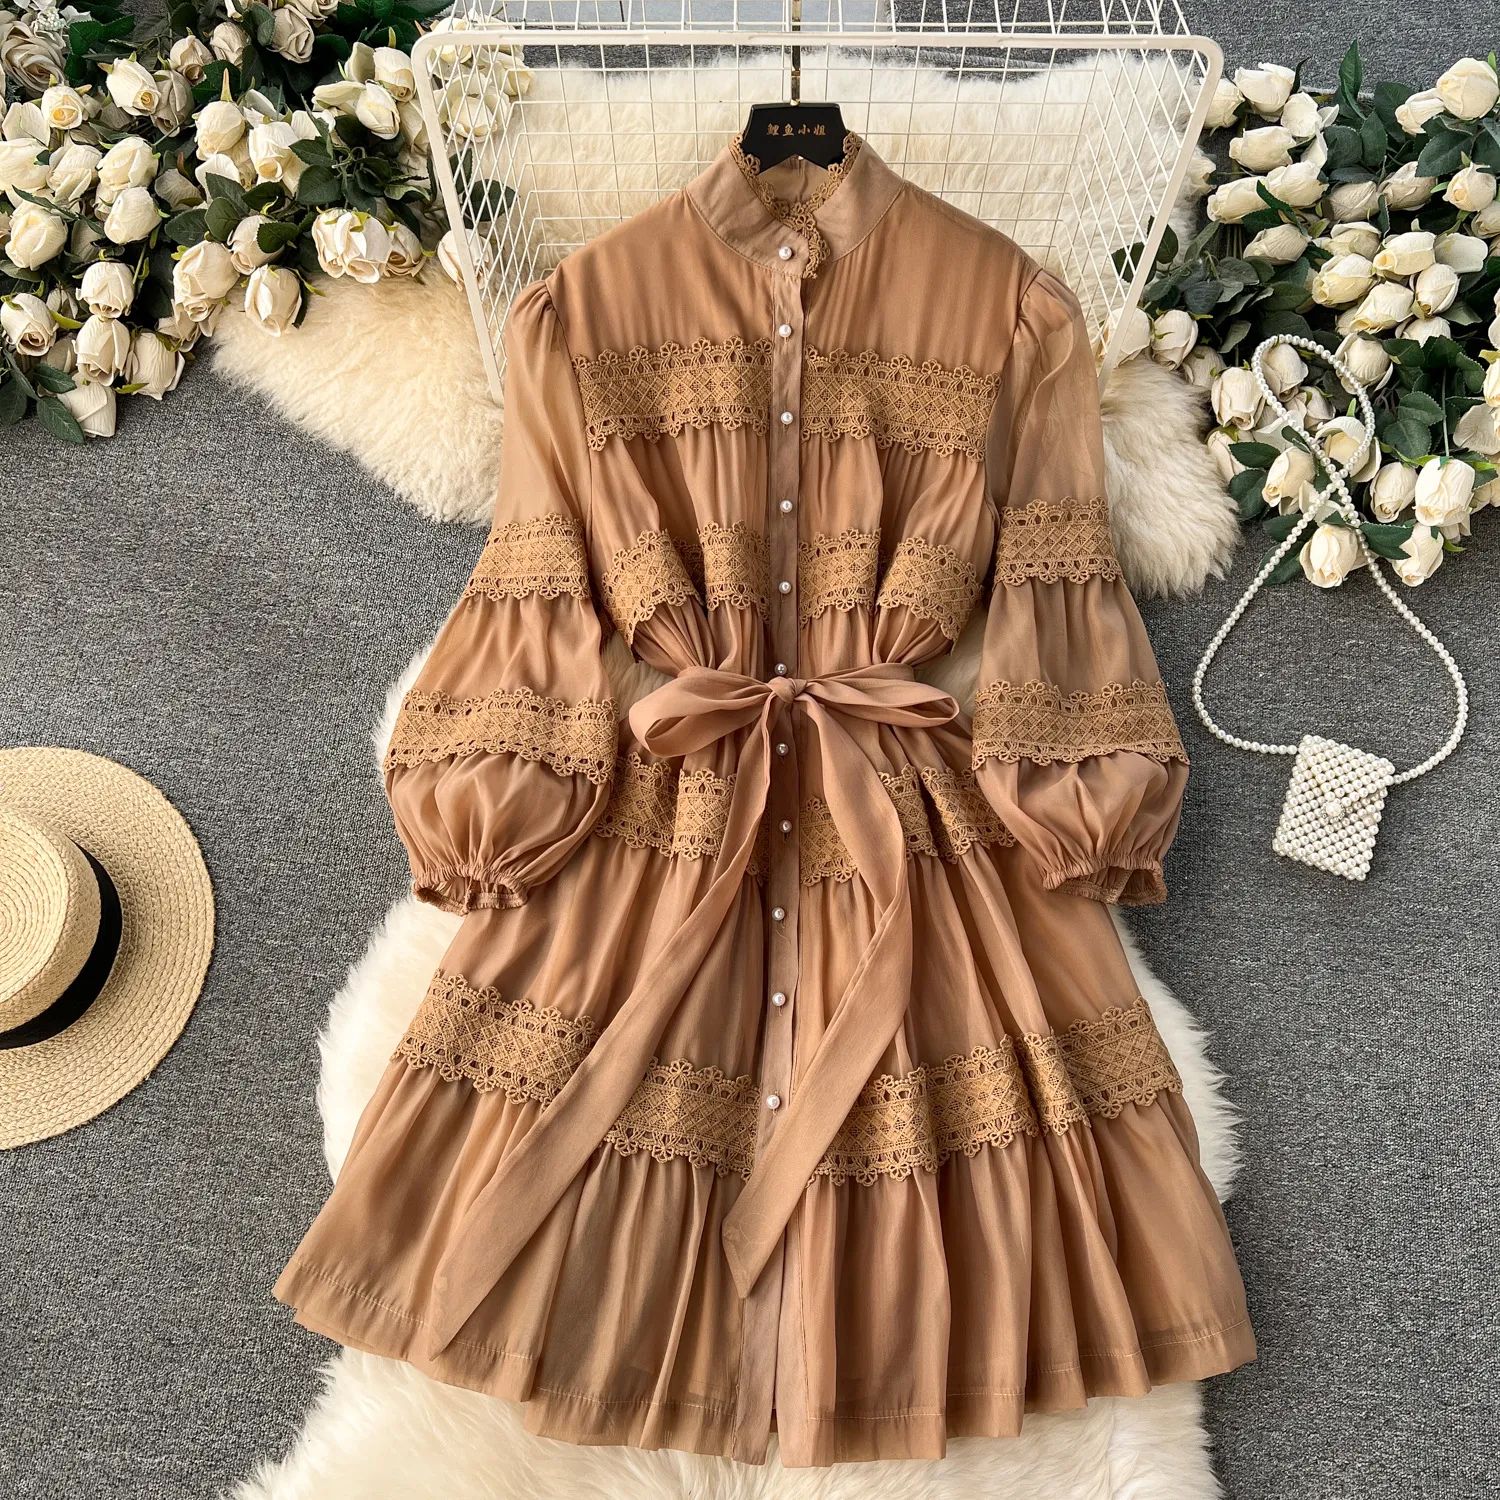 Palace style small dress, high-end niche lace patchwork, French style bubble sleeves, slim fit, short style, and elegant dress for socialites